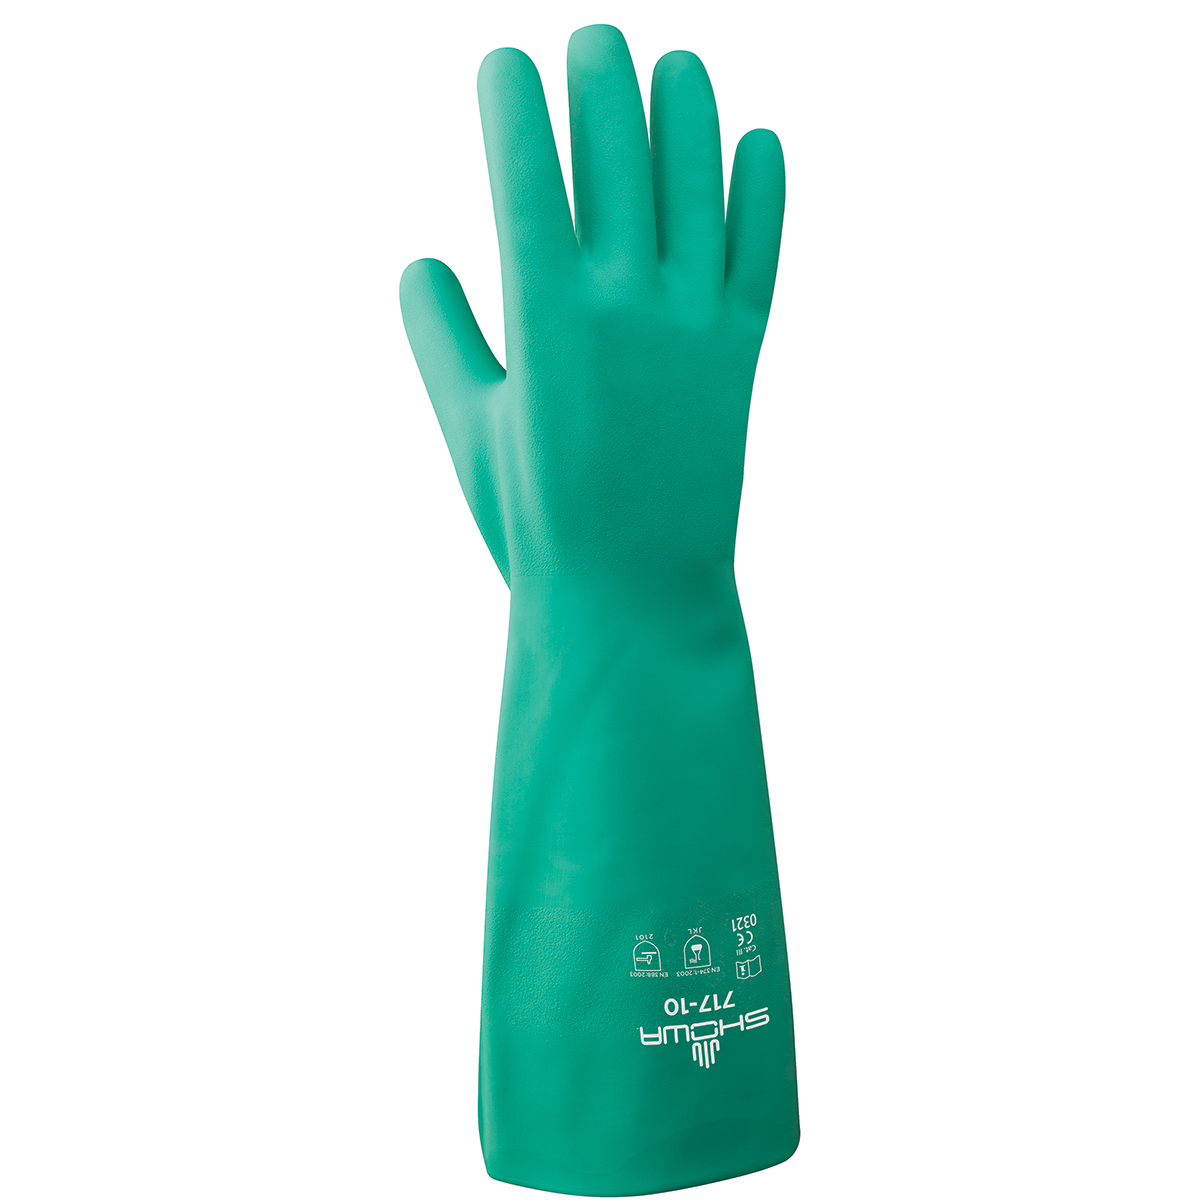 Chemical resistant unsupported nitrile, 13", 11-mil, light green, bisque finish, unlined, medium